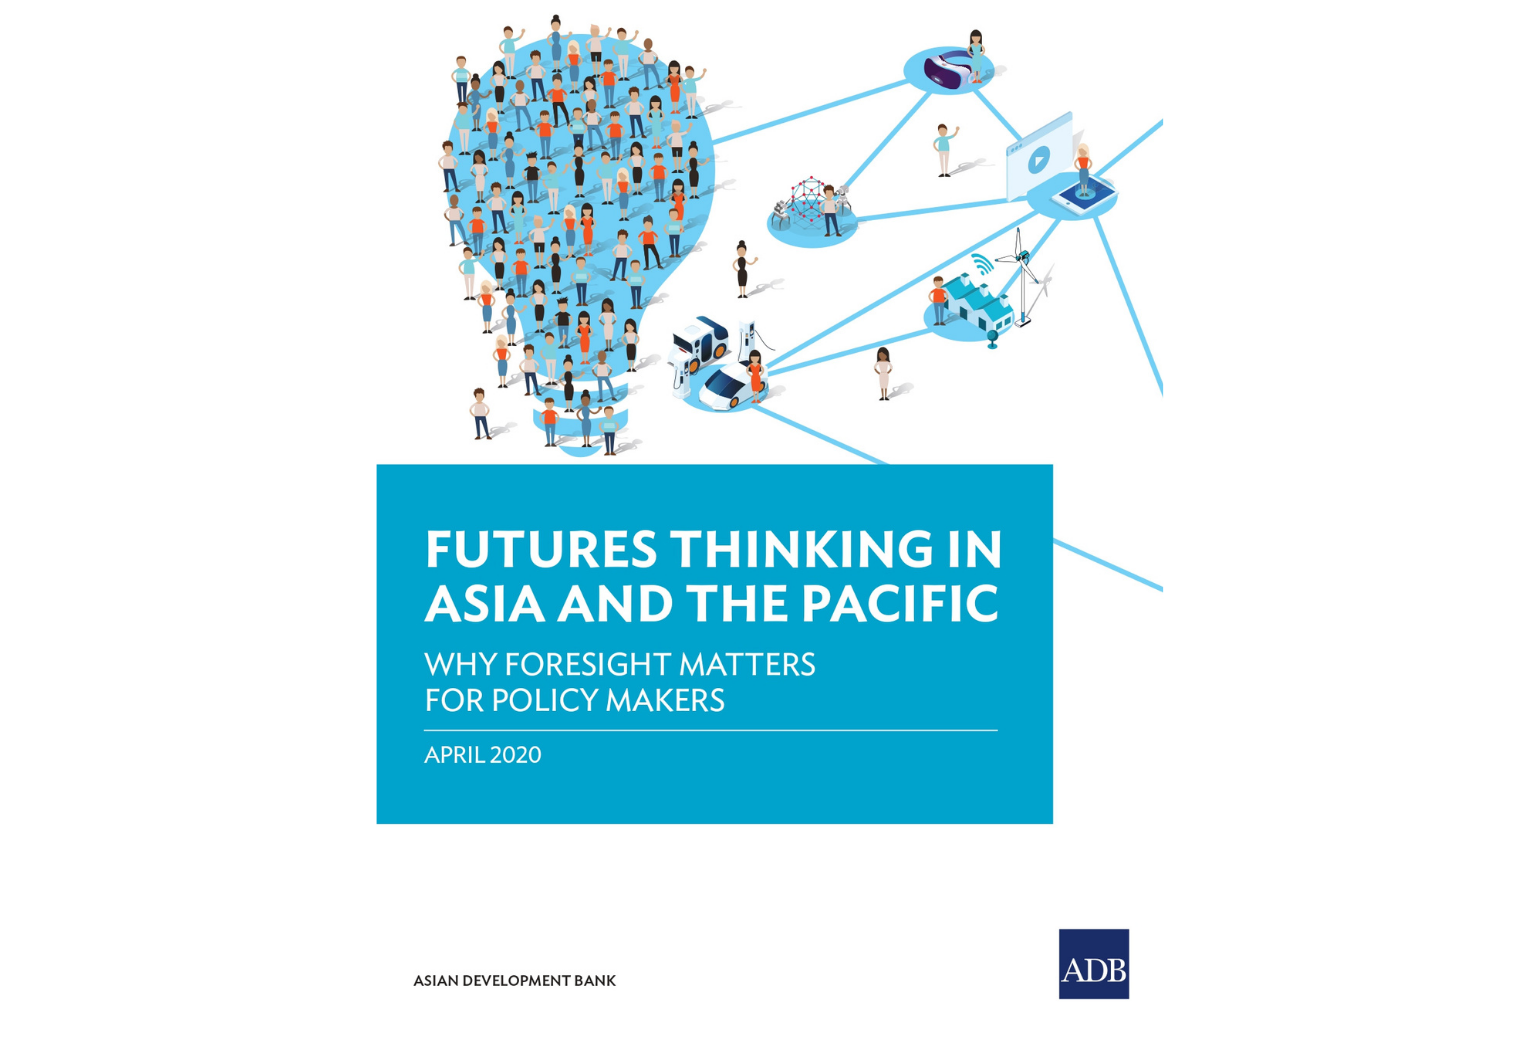 SDG Innovation Lab was Featured in ADB's "Futures Thinking in Asia and the Pacific: Why Foresight Matters for Policy Makers" Publication